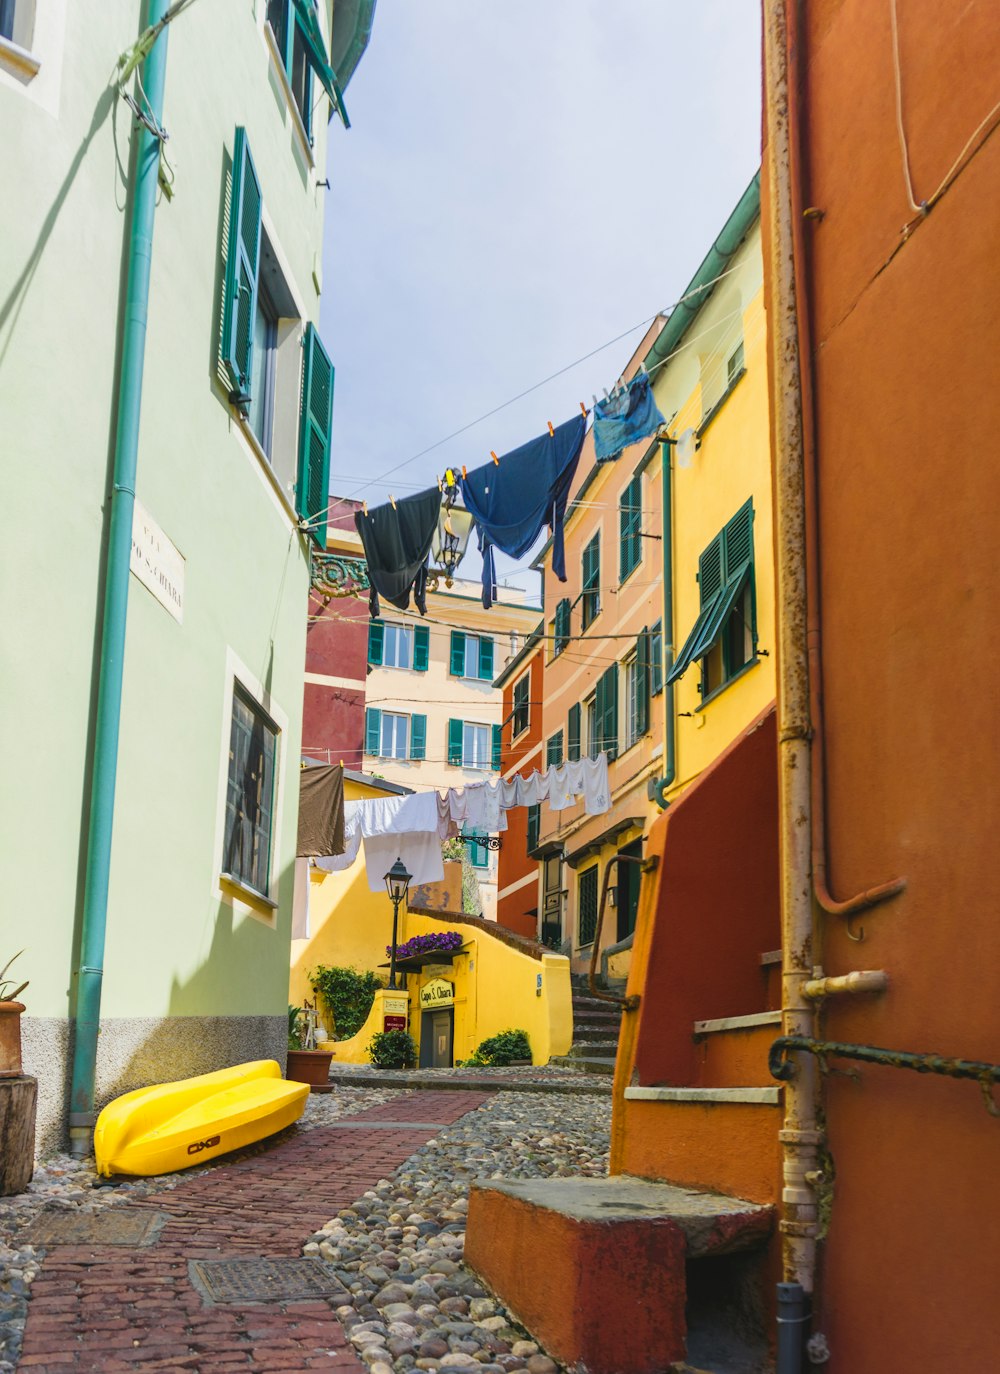 a narrow cobblestone street with a yellow banana laying on the ground